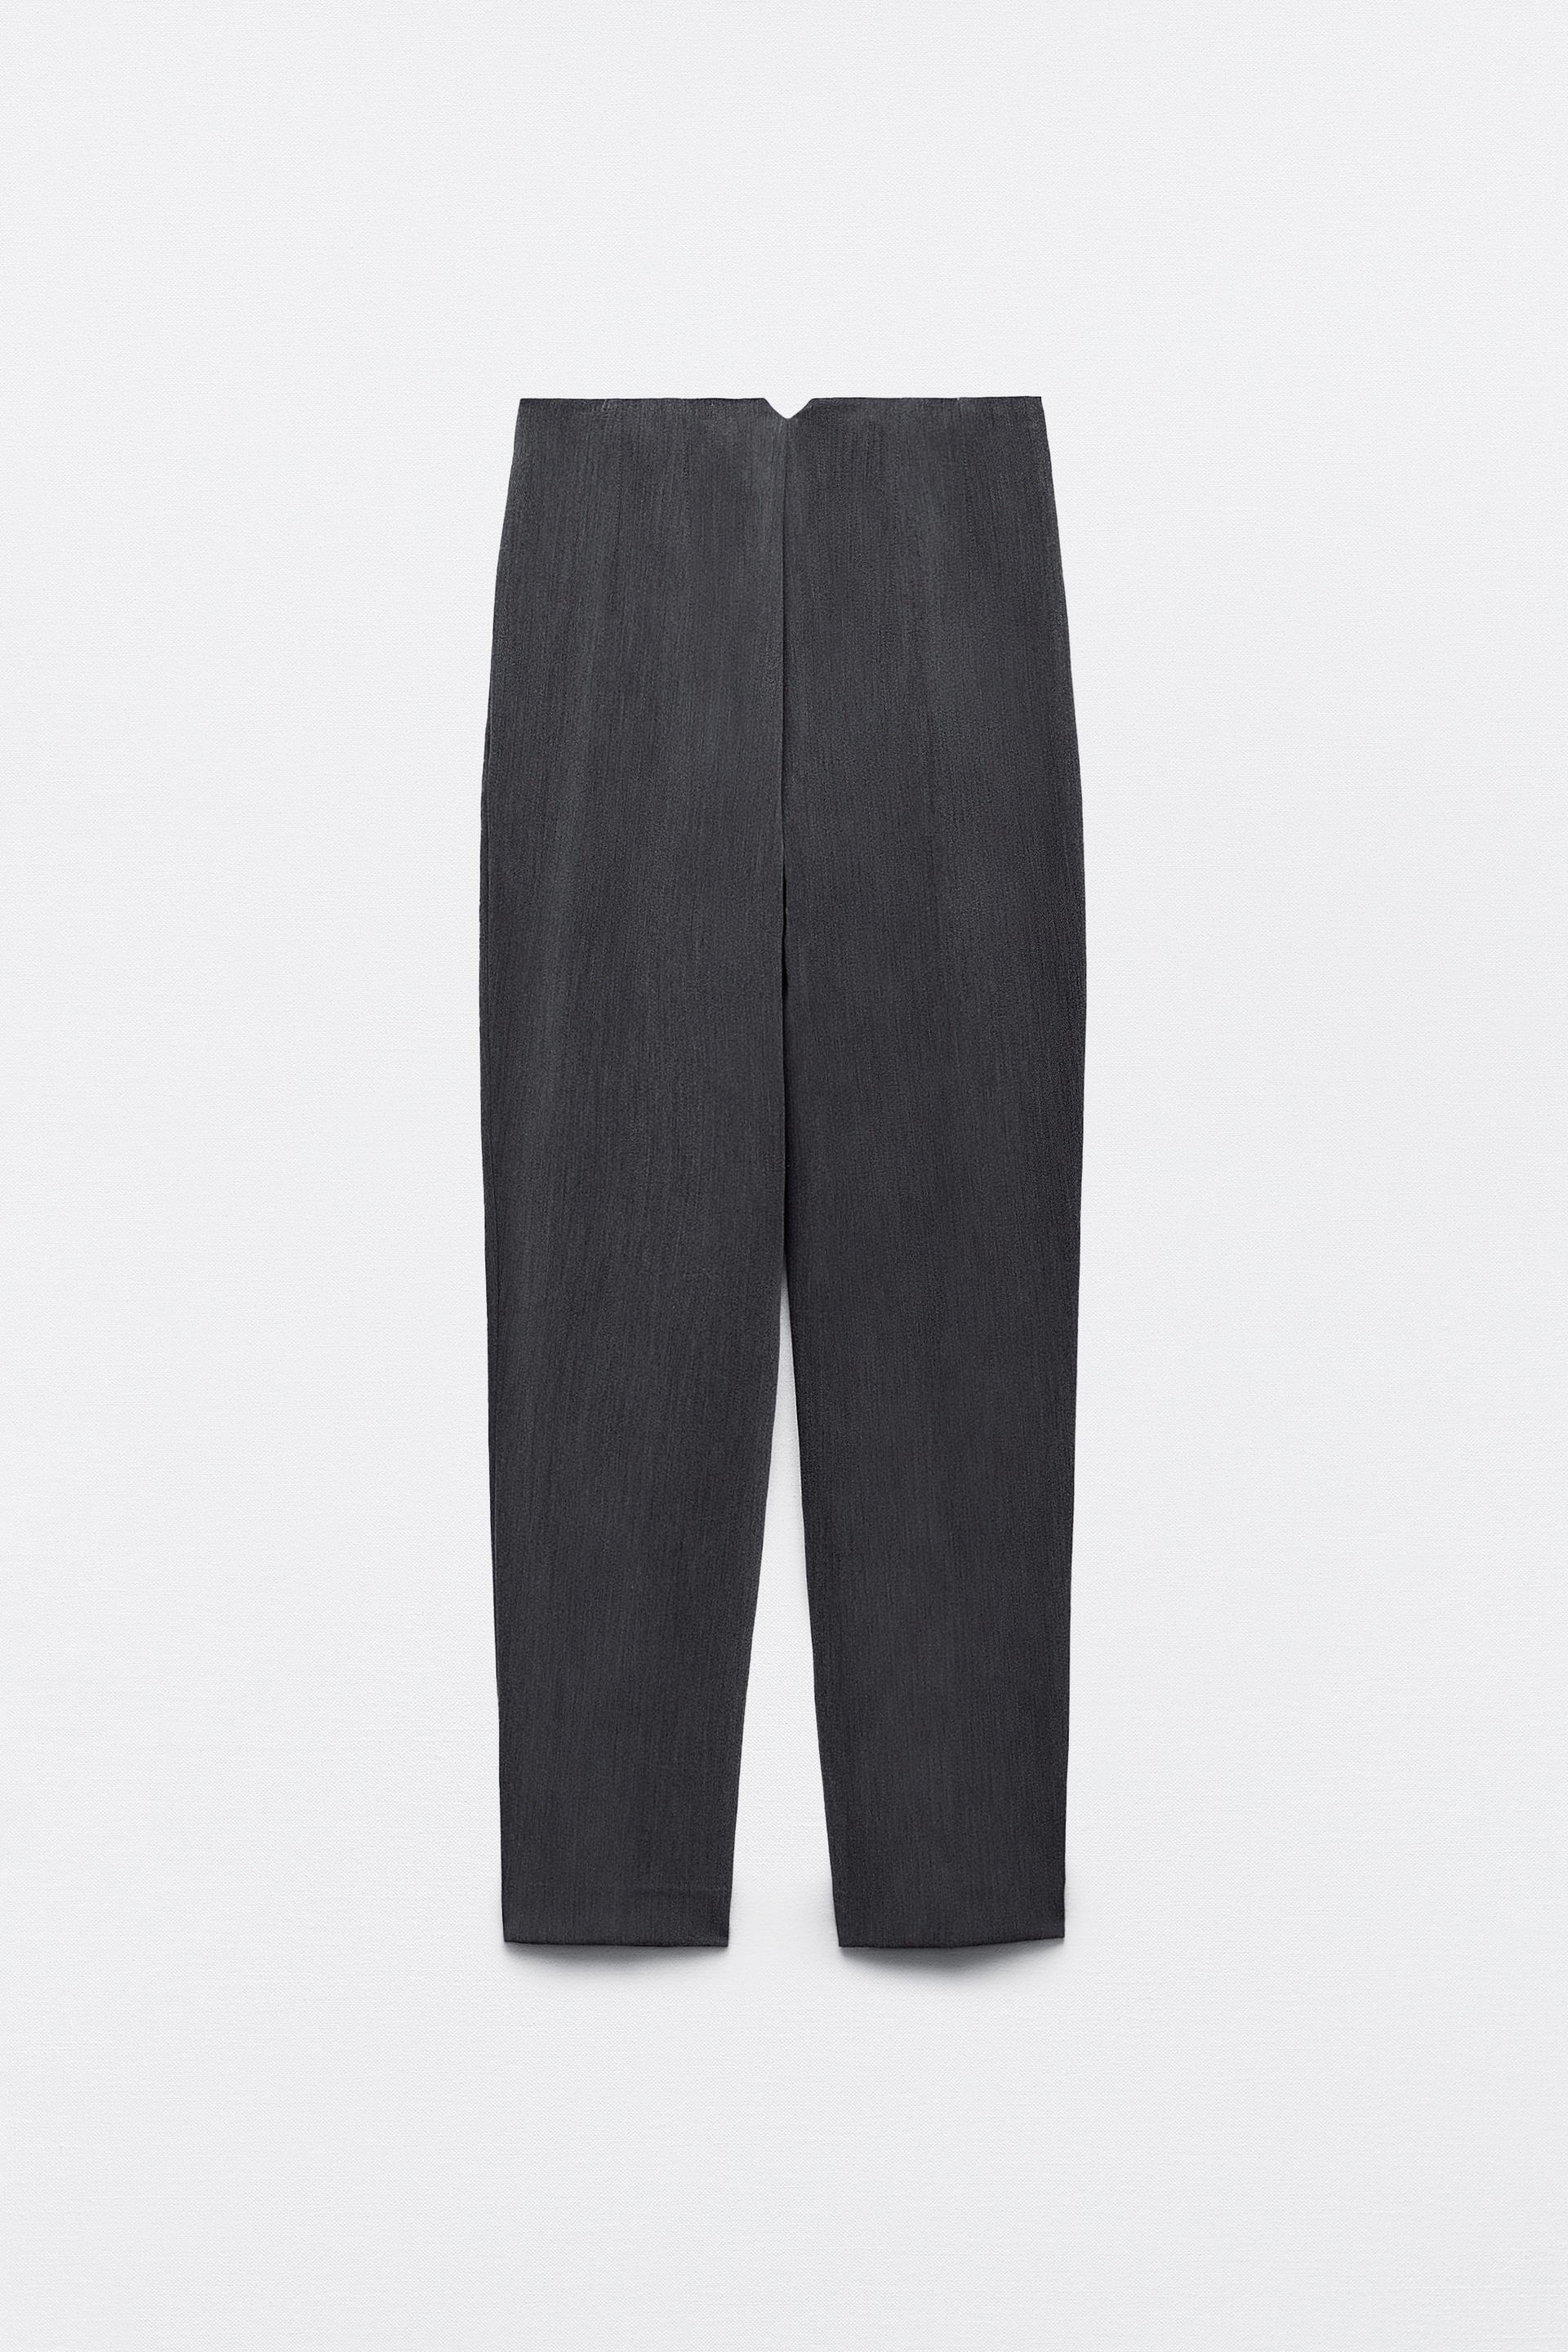 Zara PANTS WITH FABRIC-COVERED BELT - 130185715-800